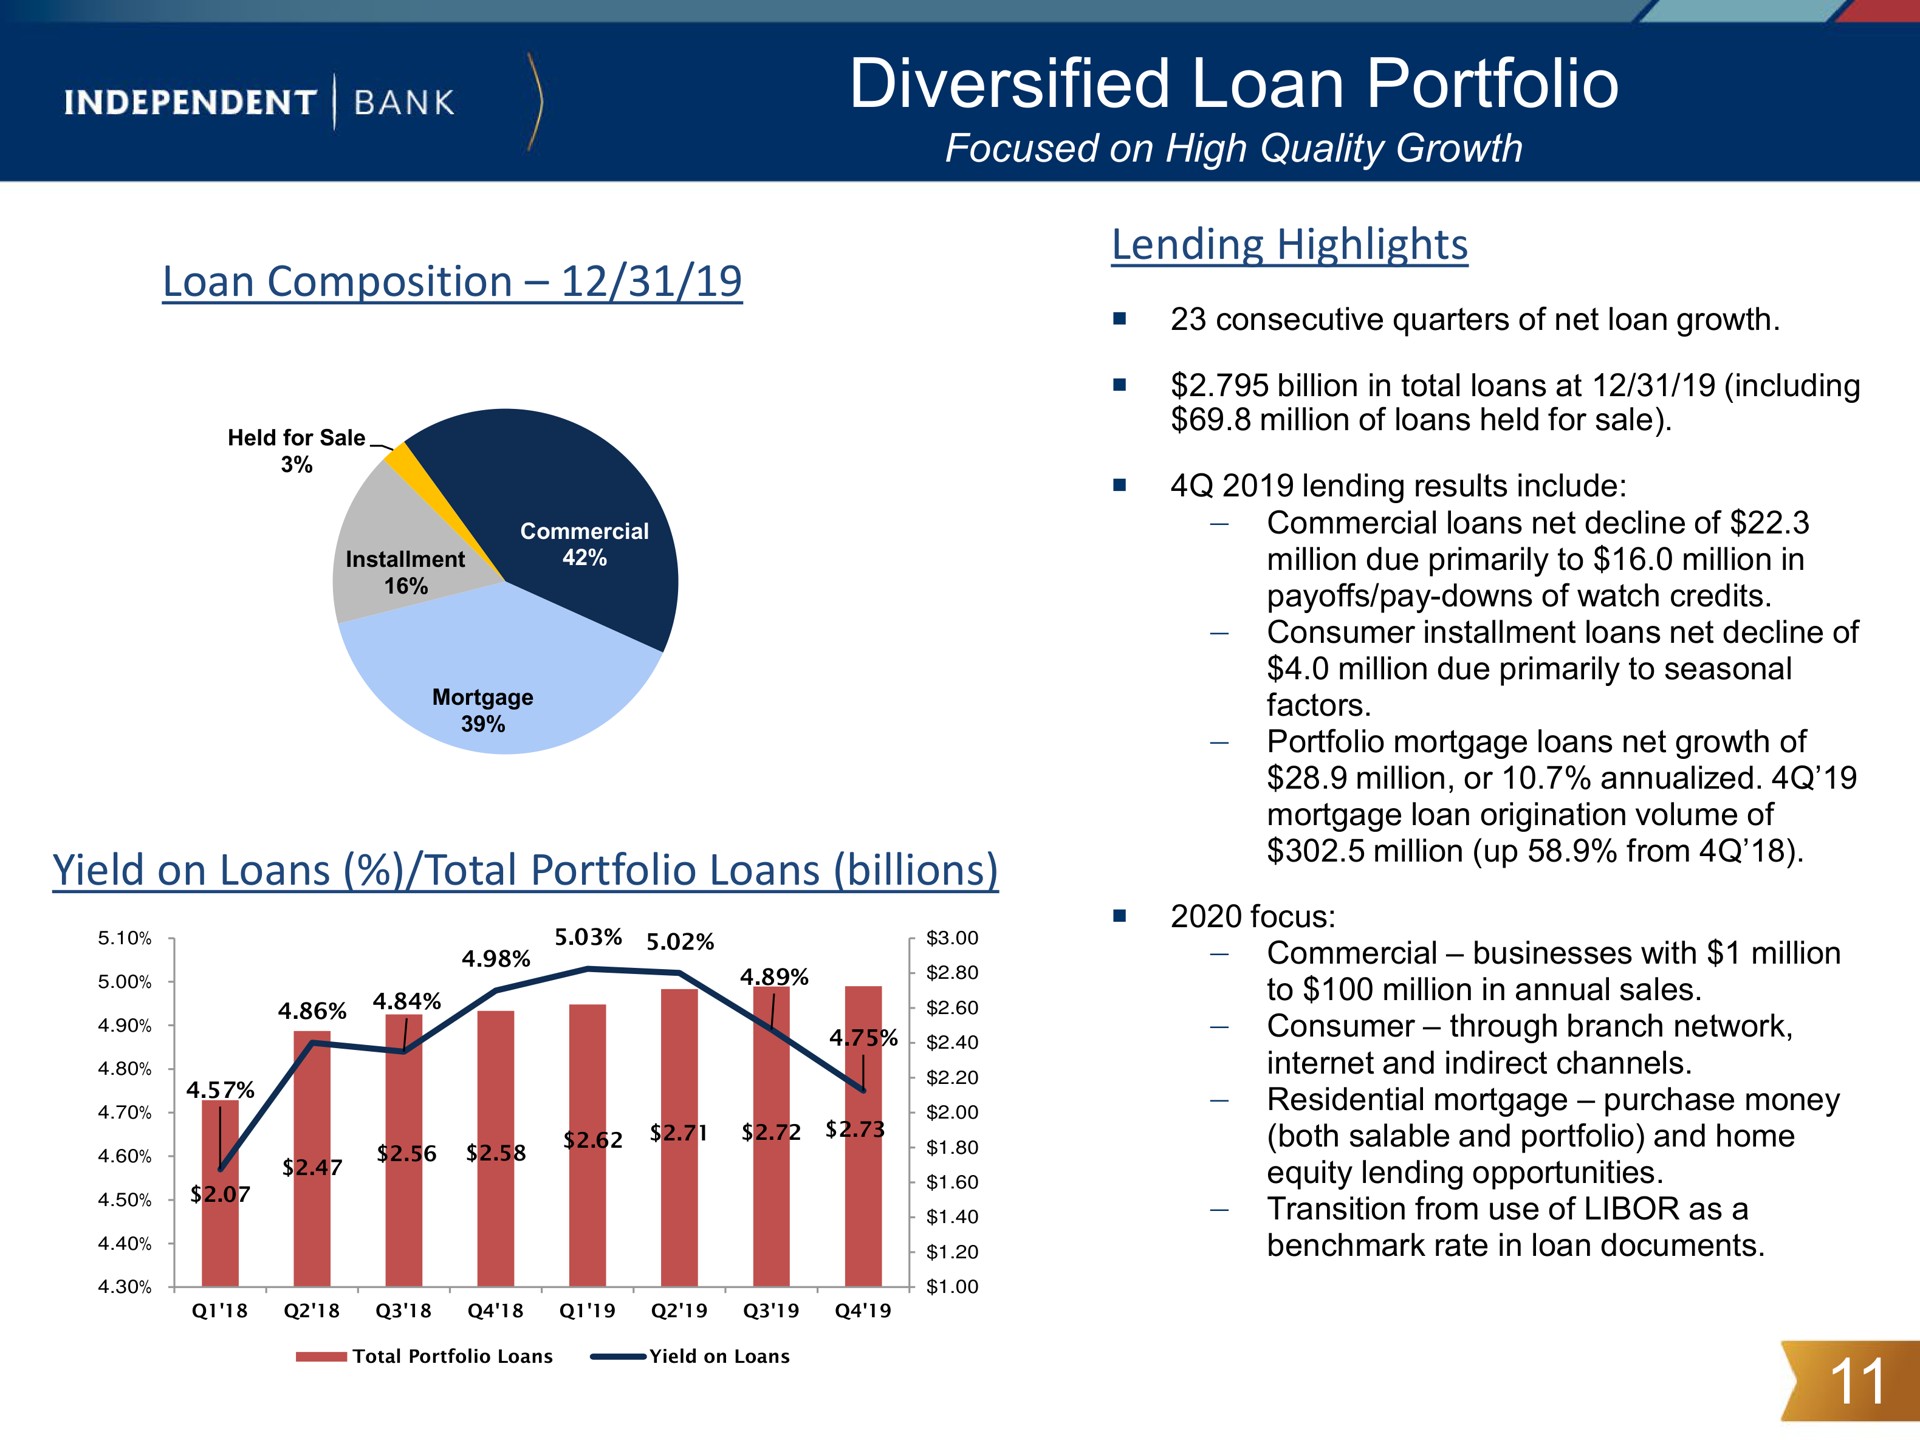 diversified loan portfolio ary a | Independent Bank Corp